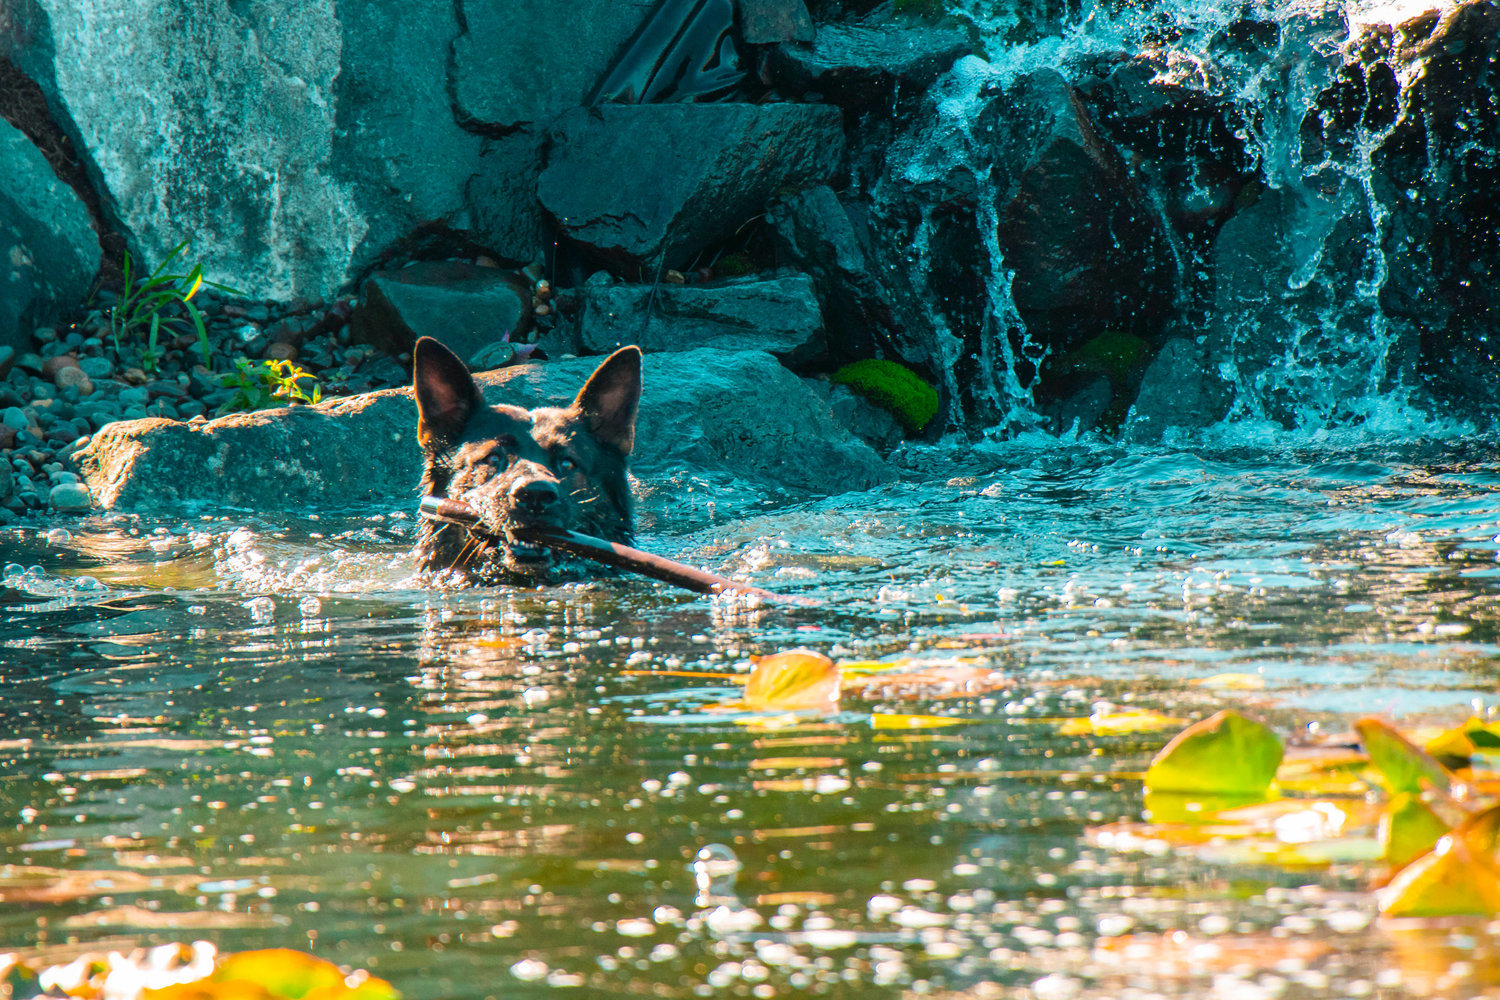 Max cools off in a front yard pond Tuesday afternoon at Kraftwerk K9 German Shepherds in Rochester.